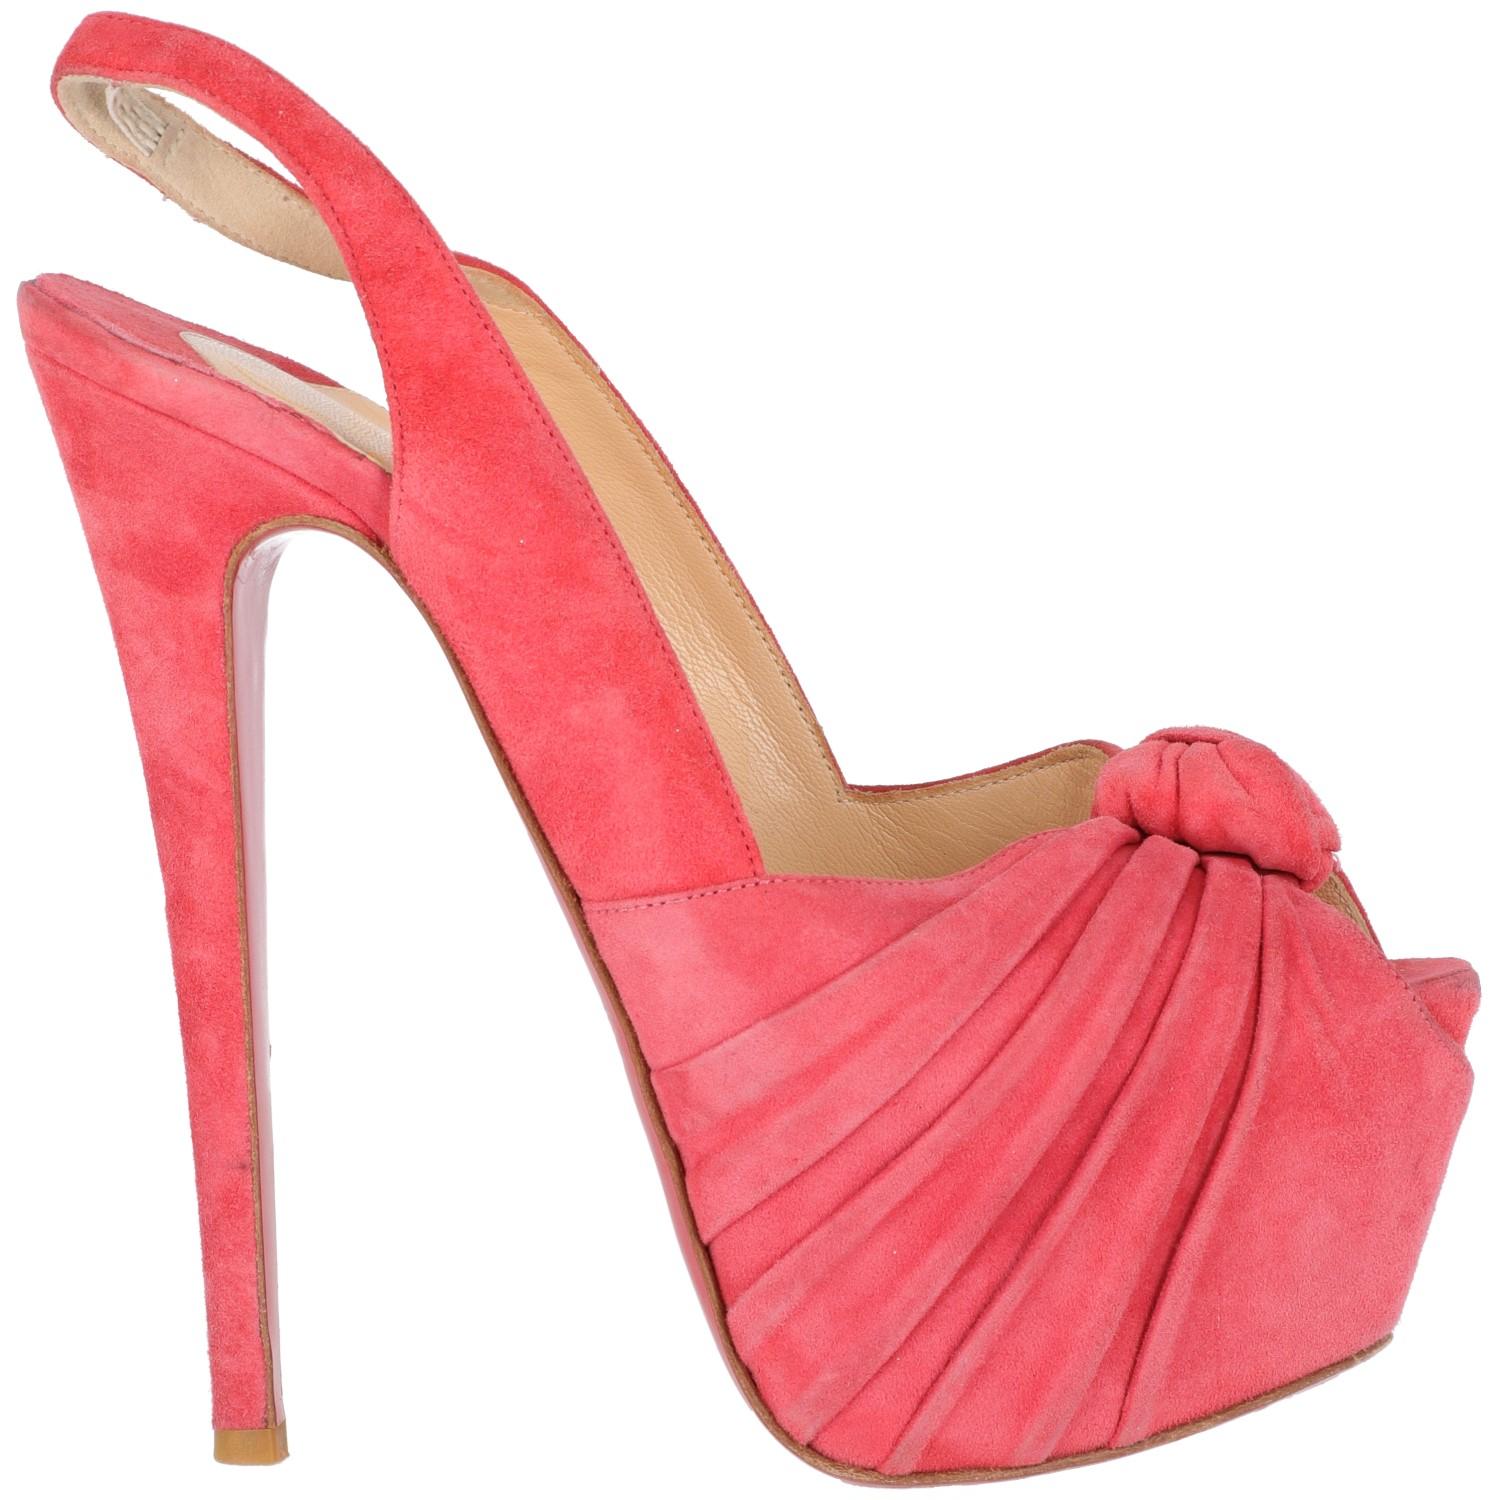 The lovely Christian Louboutin flamingo pink suede sling-back sandal features vertiginous 16cm spike heels and 5.5 cm plateau. With open toe and embellished by a fancy decorative detail.
The item shows light scratches at toe and at heels, as shown